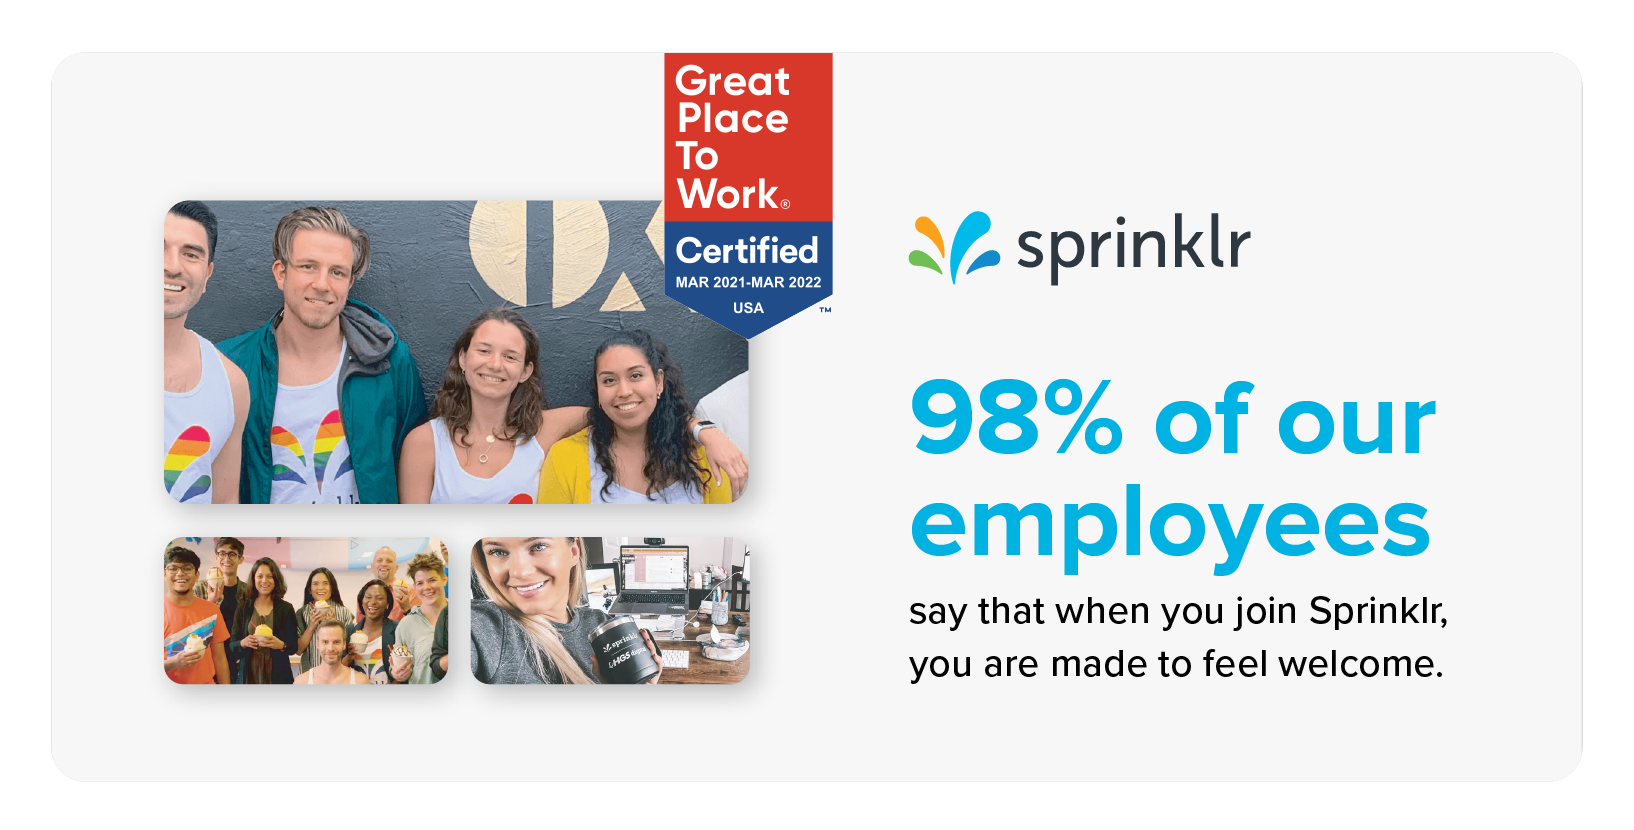 Sprinklr is Certified as a Great Place to Work